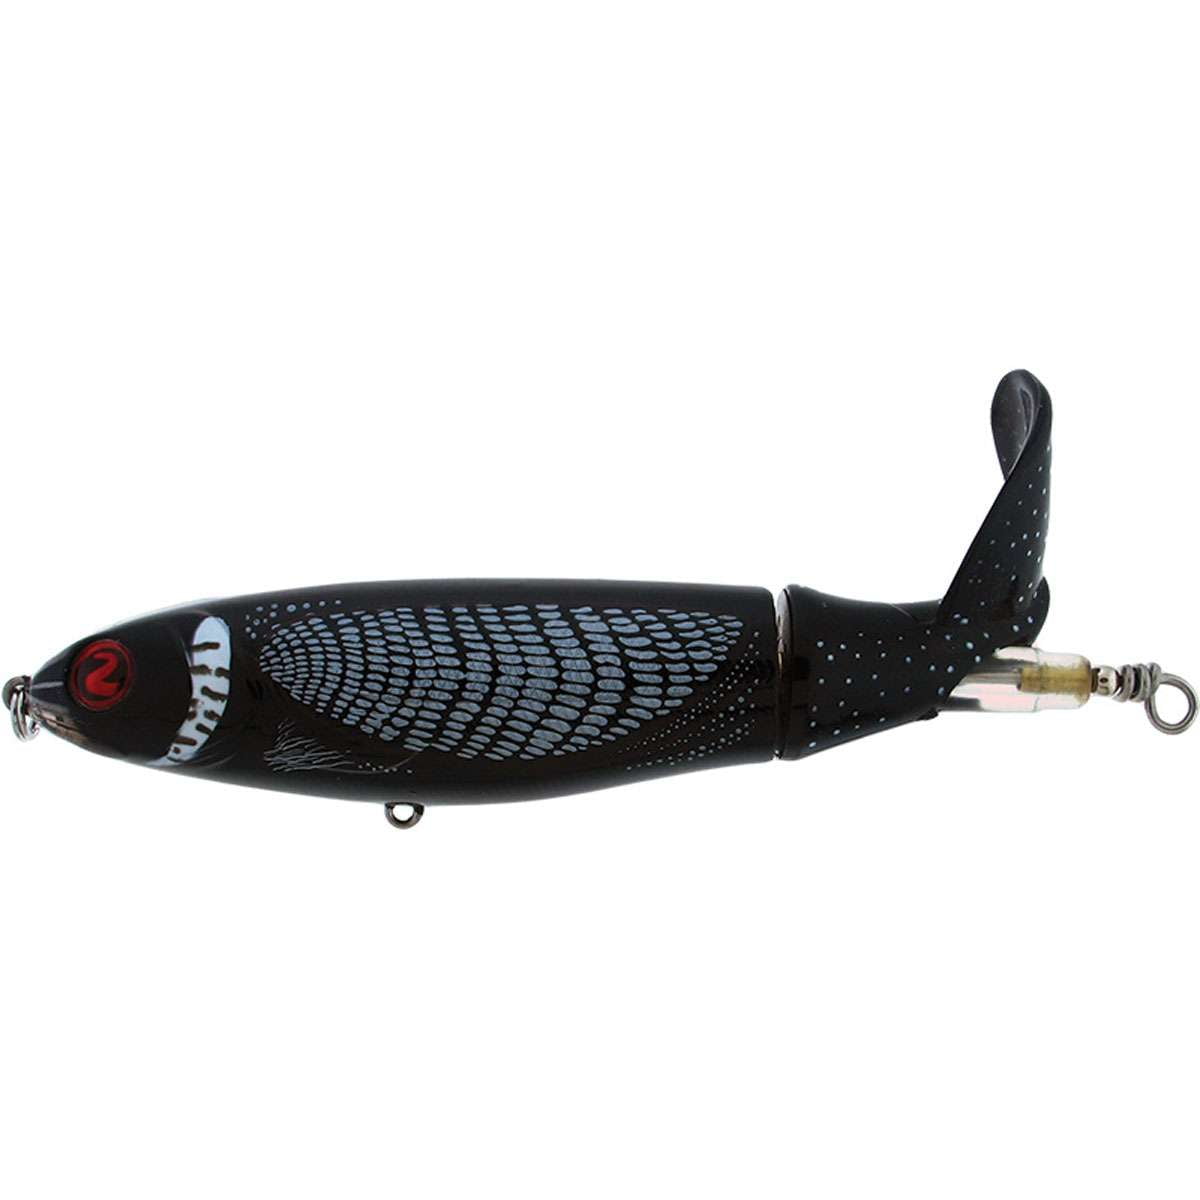 3 lures river2sea bass topwater whopper plopper 90 i know it 3 1/2" .4oz 